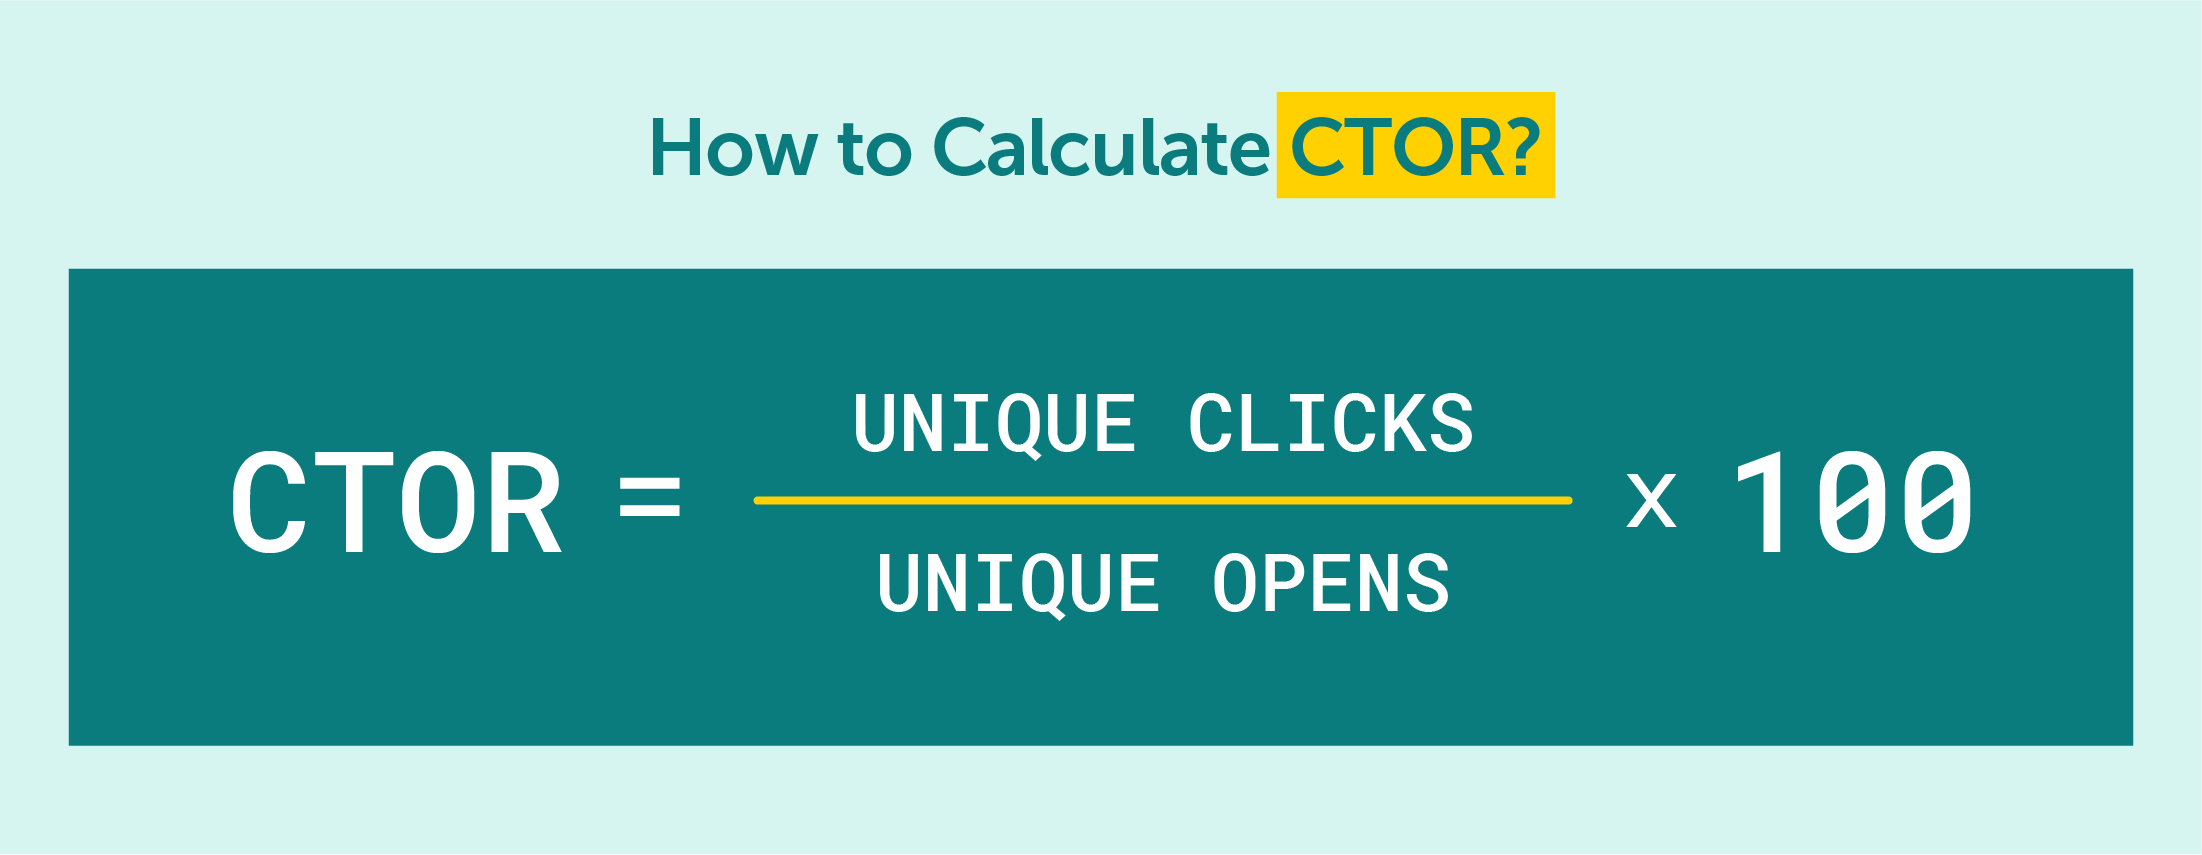 how_to_calculate_ctor